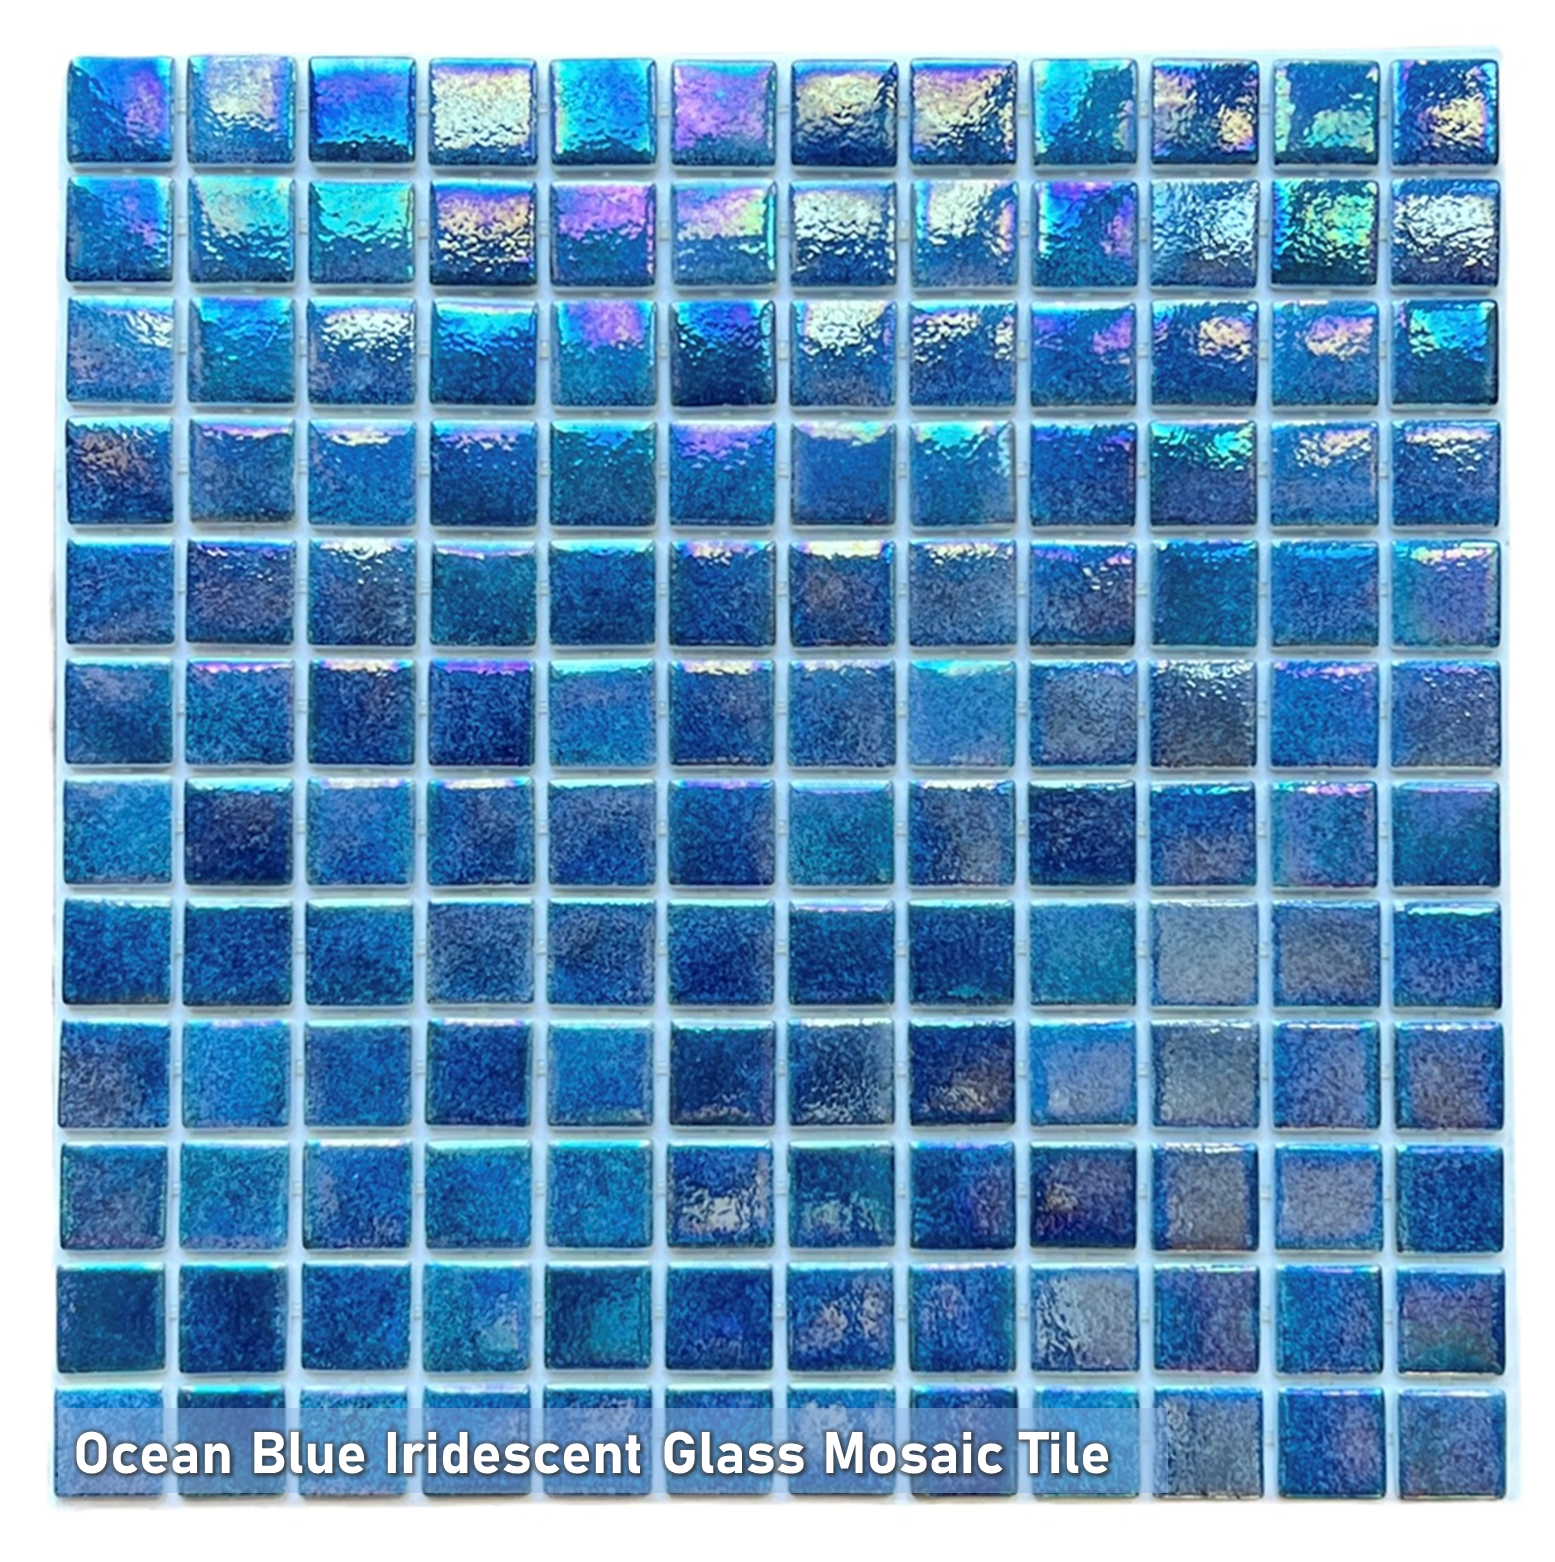 Tenedos Ocean Blue 1x1 Square Iridescent Recycled Glass Mosaic Floor and Wall Tile for Kitchen Backsplash, Swimming Pool Tile, Bathroom Wall, Accent Wall